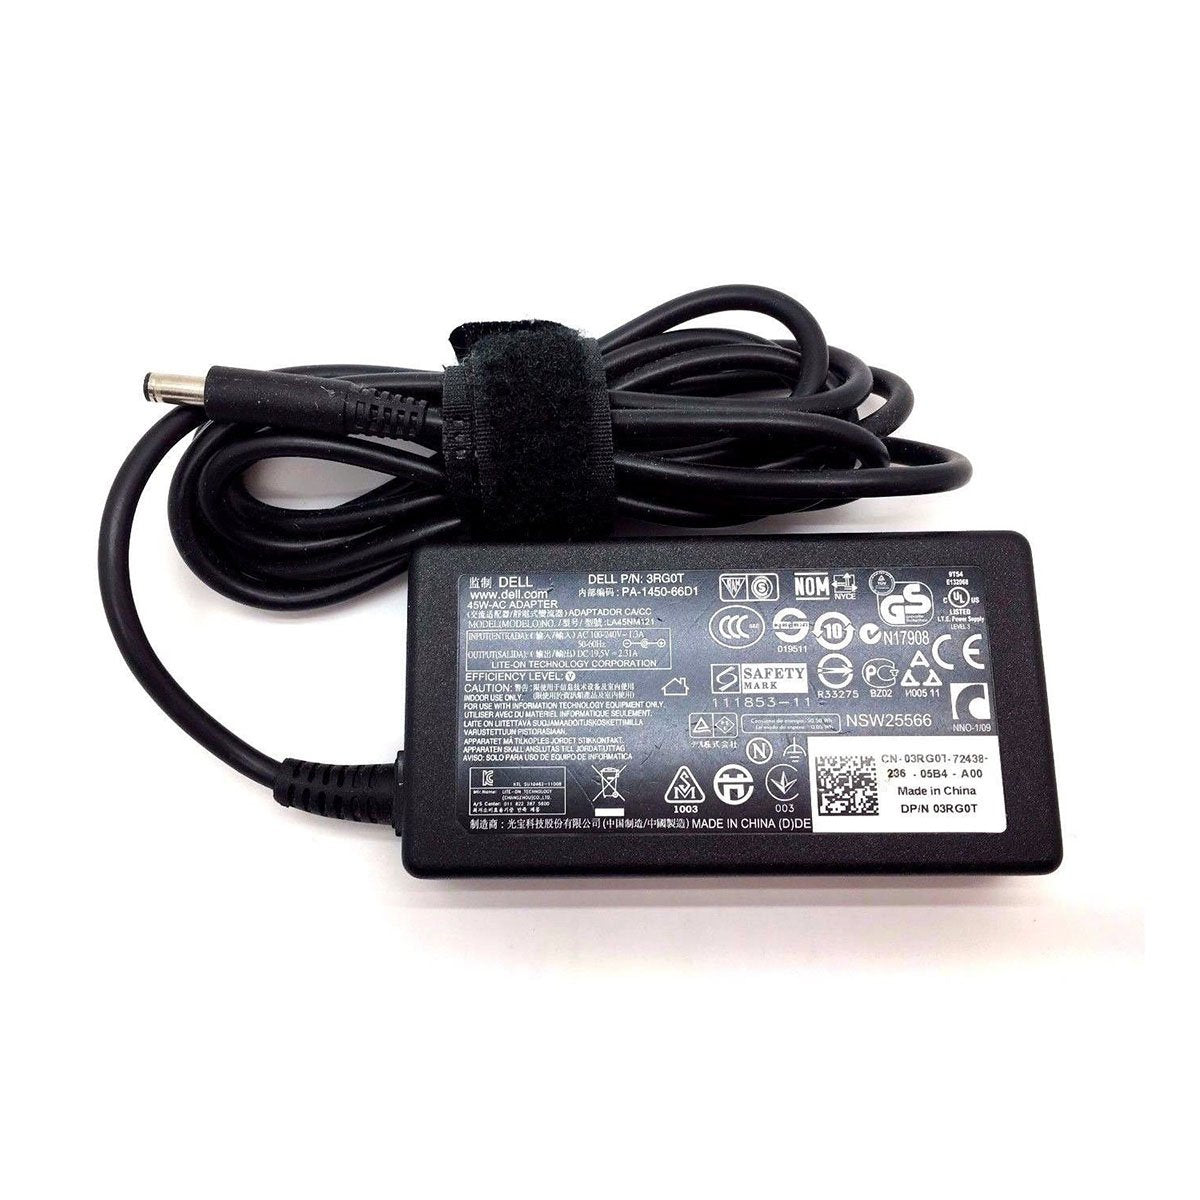 Dell Inspiron 11 3162 Original 45W Laptop Charger Adapter With Power Cord 19.5V 4.5mm Pin